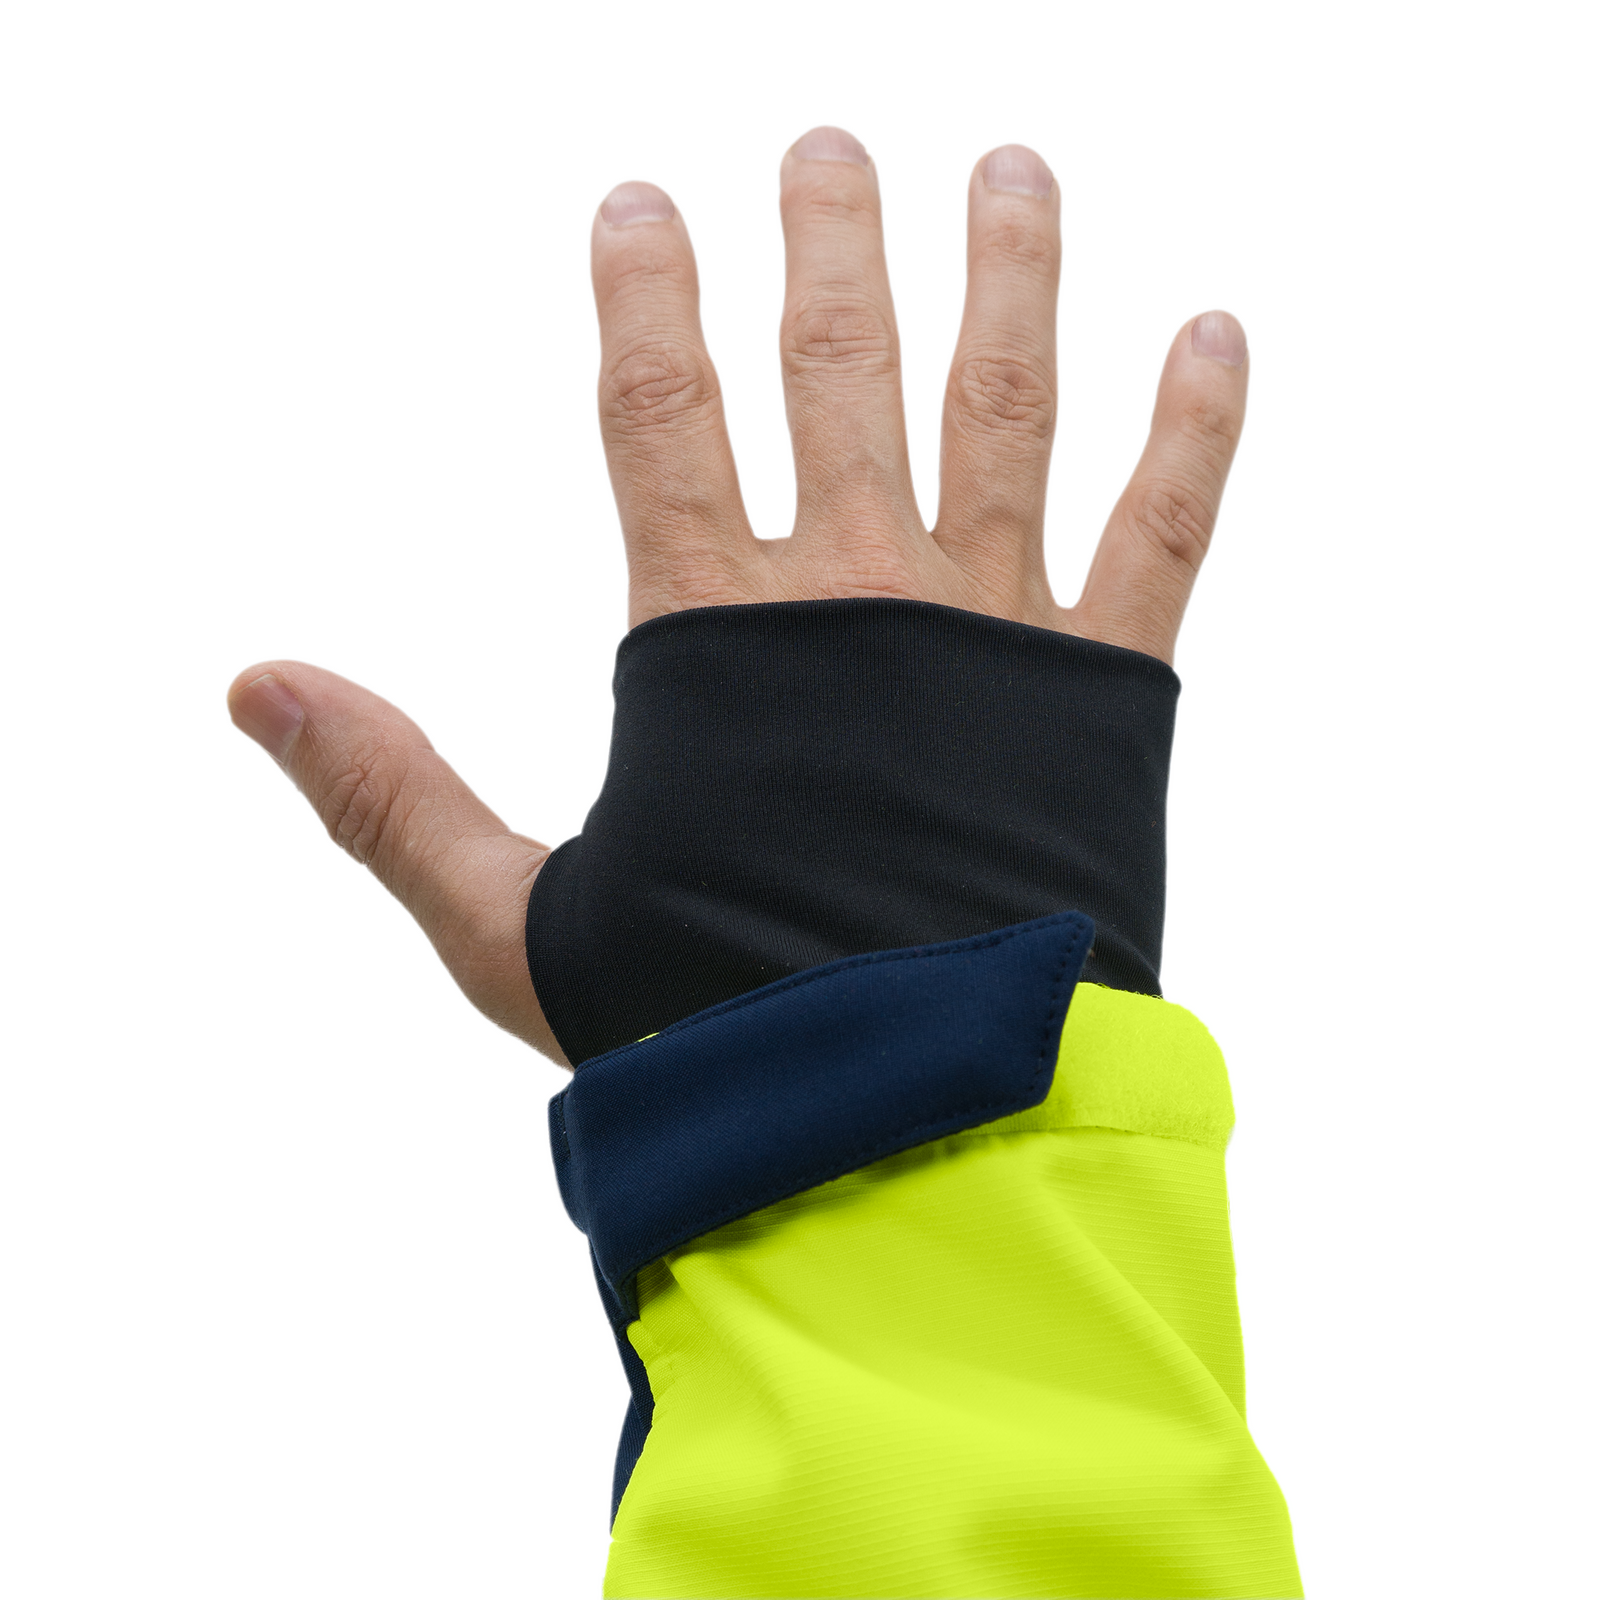 Hi-Vis Softshell Waterproof Fleece Lined Safety Jacket with